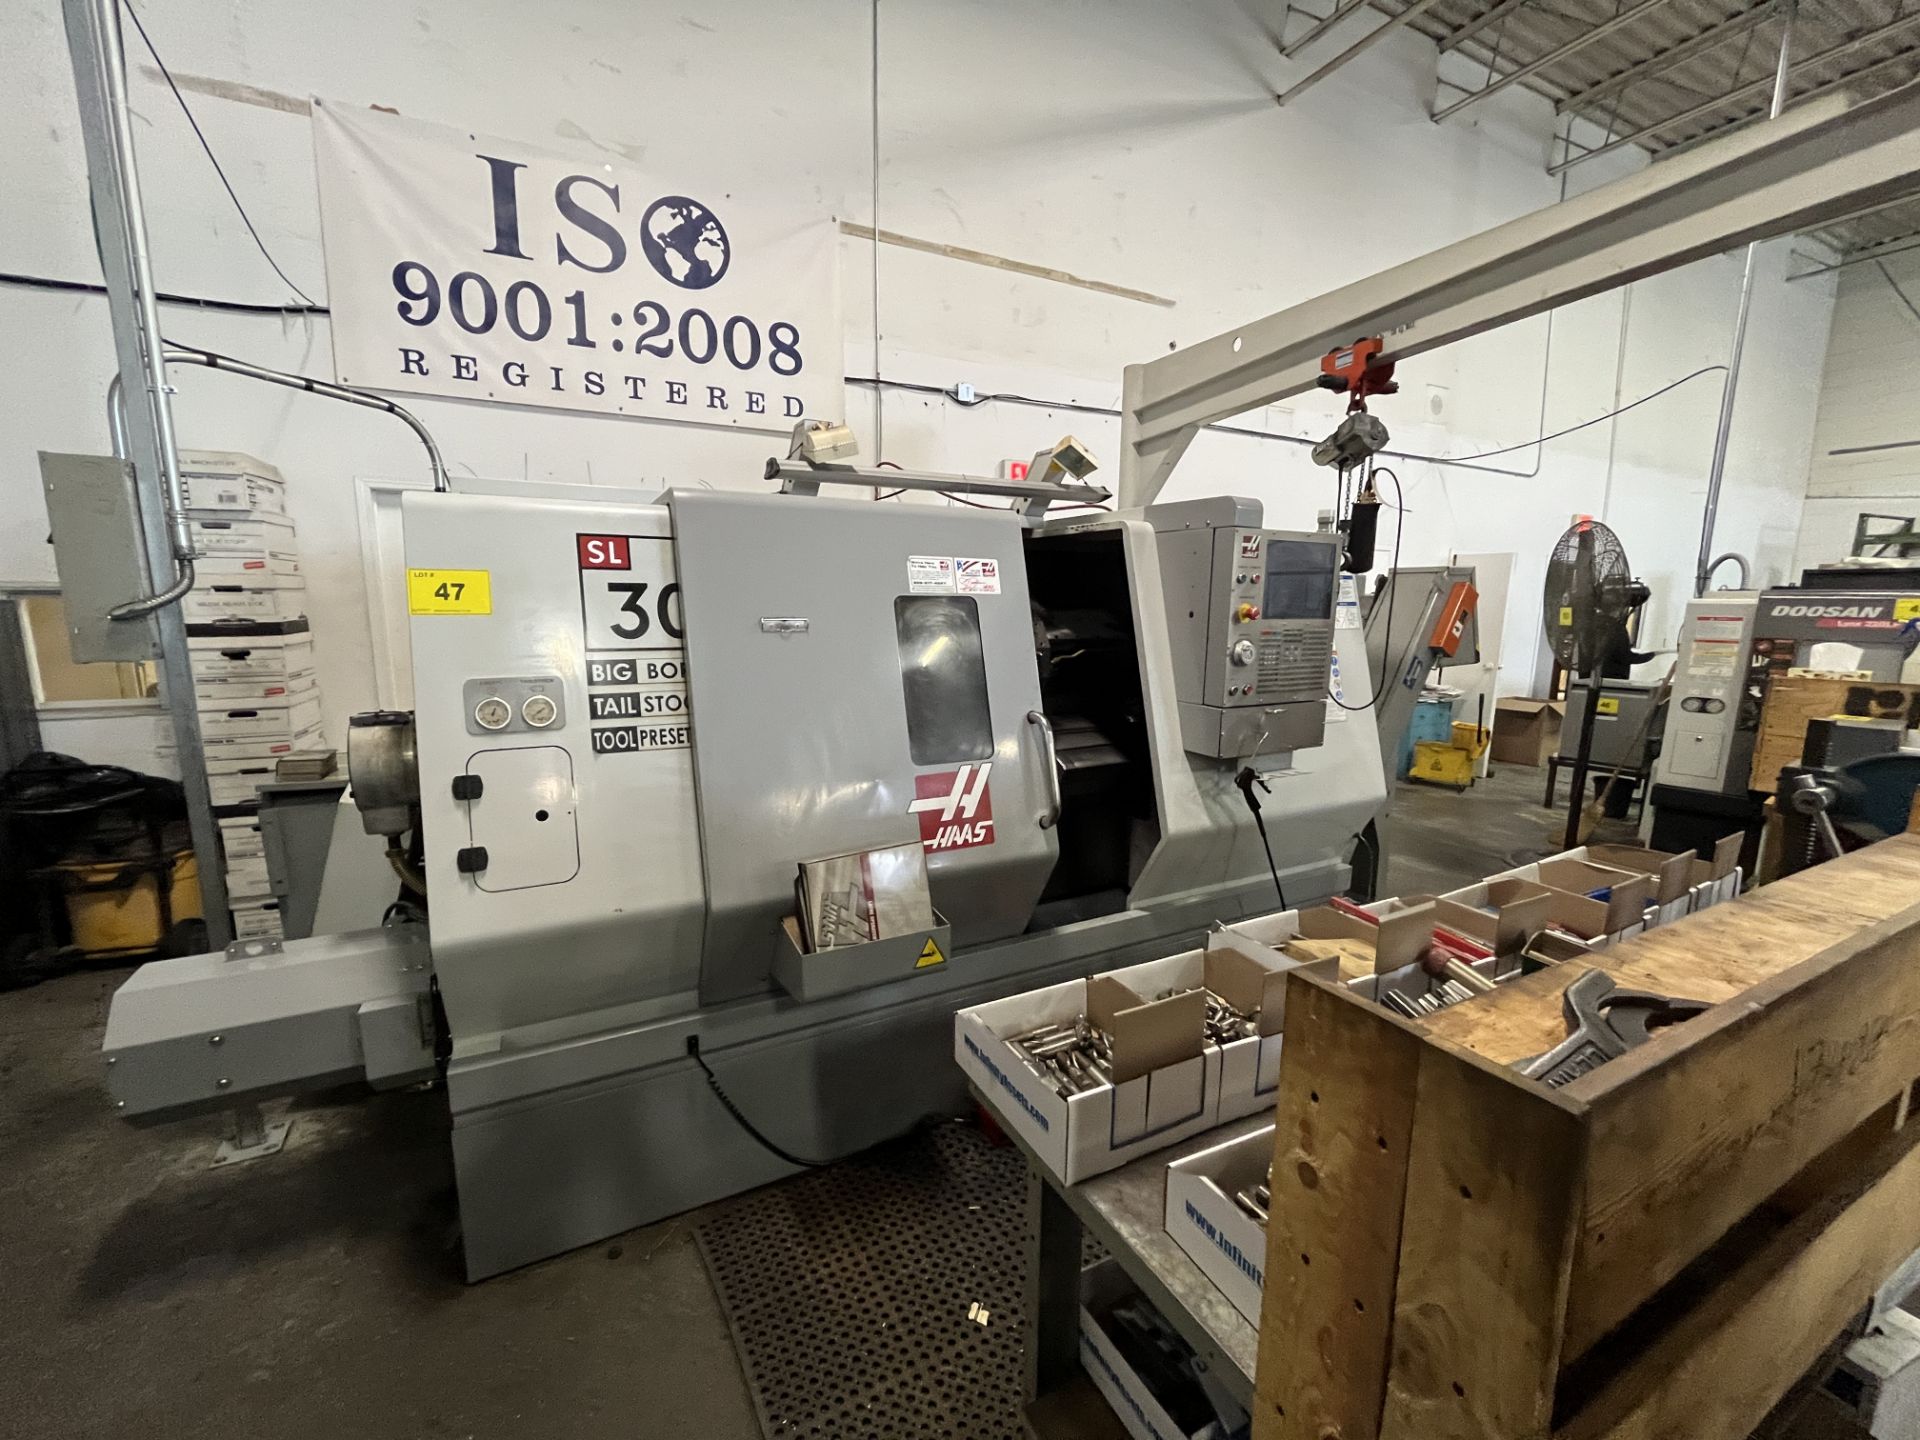 2008 HAAS SL-30TB CNC TURNING CENTER, CNC CONTROL, 15” CHUCK, BIG BORE, TAILSTOCK, TOOL SETTER, CHIP - Image 14 of 14